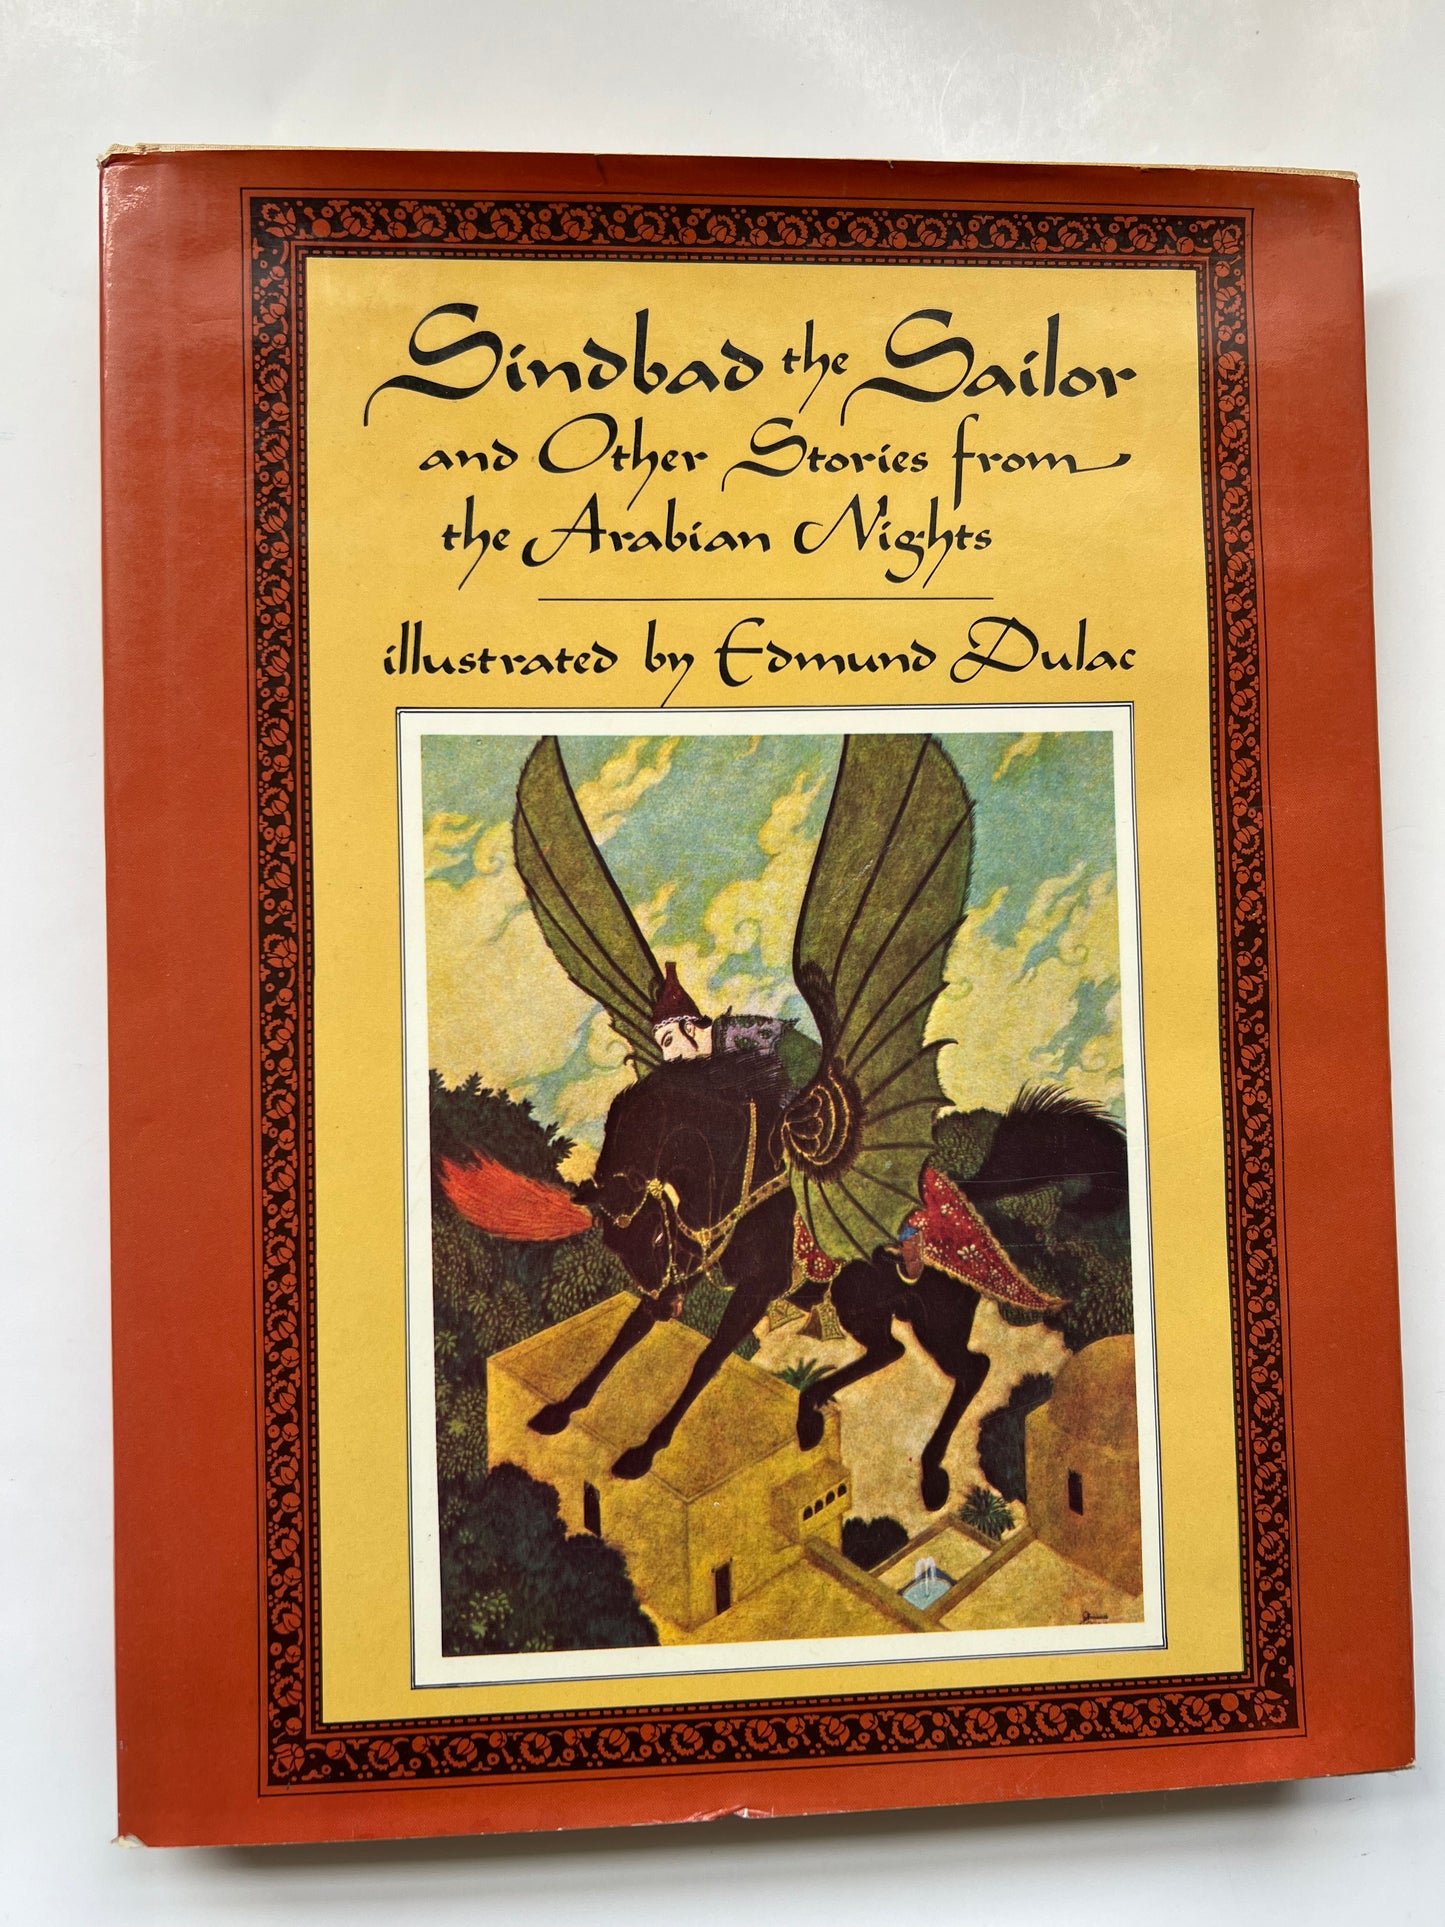 Sinbad the Sailor and other Stories from the Arabian Nights